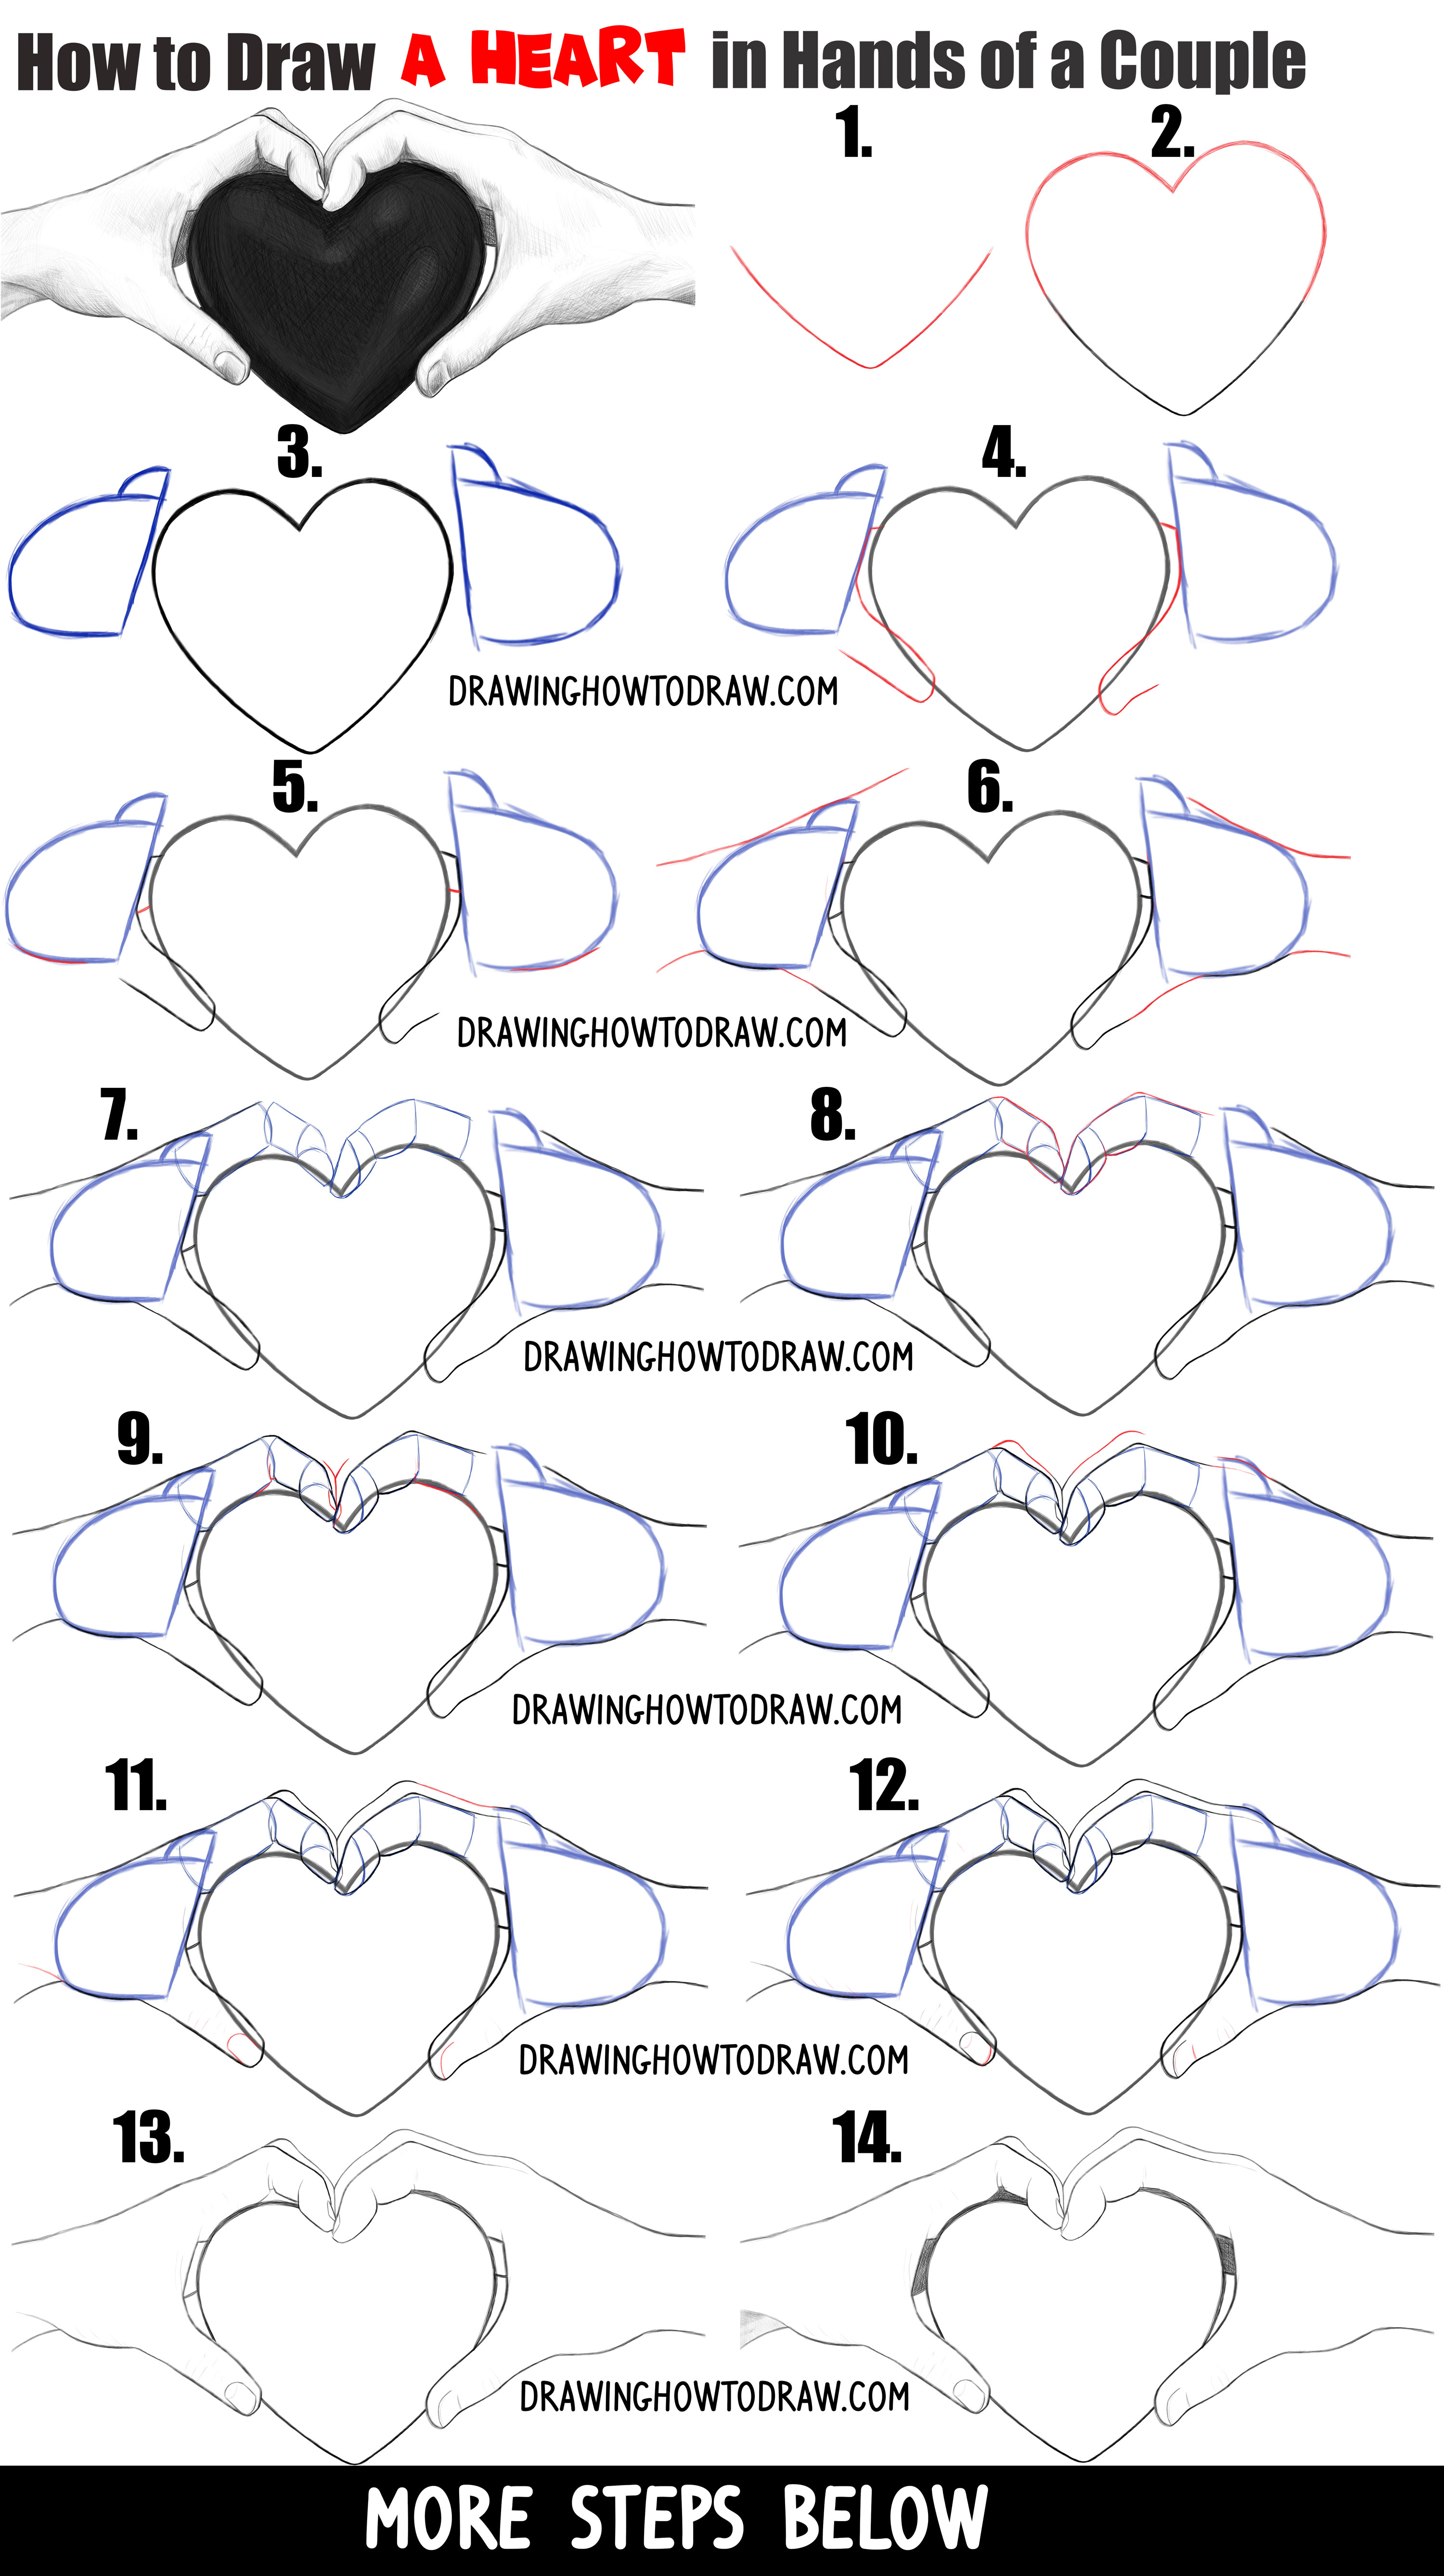 How to Draw Couple's Hands Holding a Heart for Valentine's Day Easy